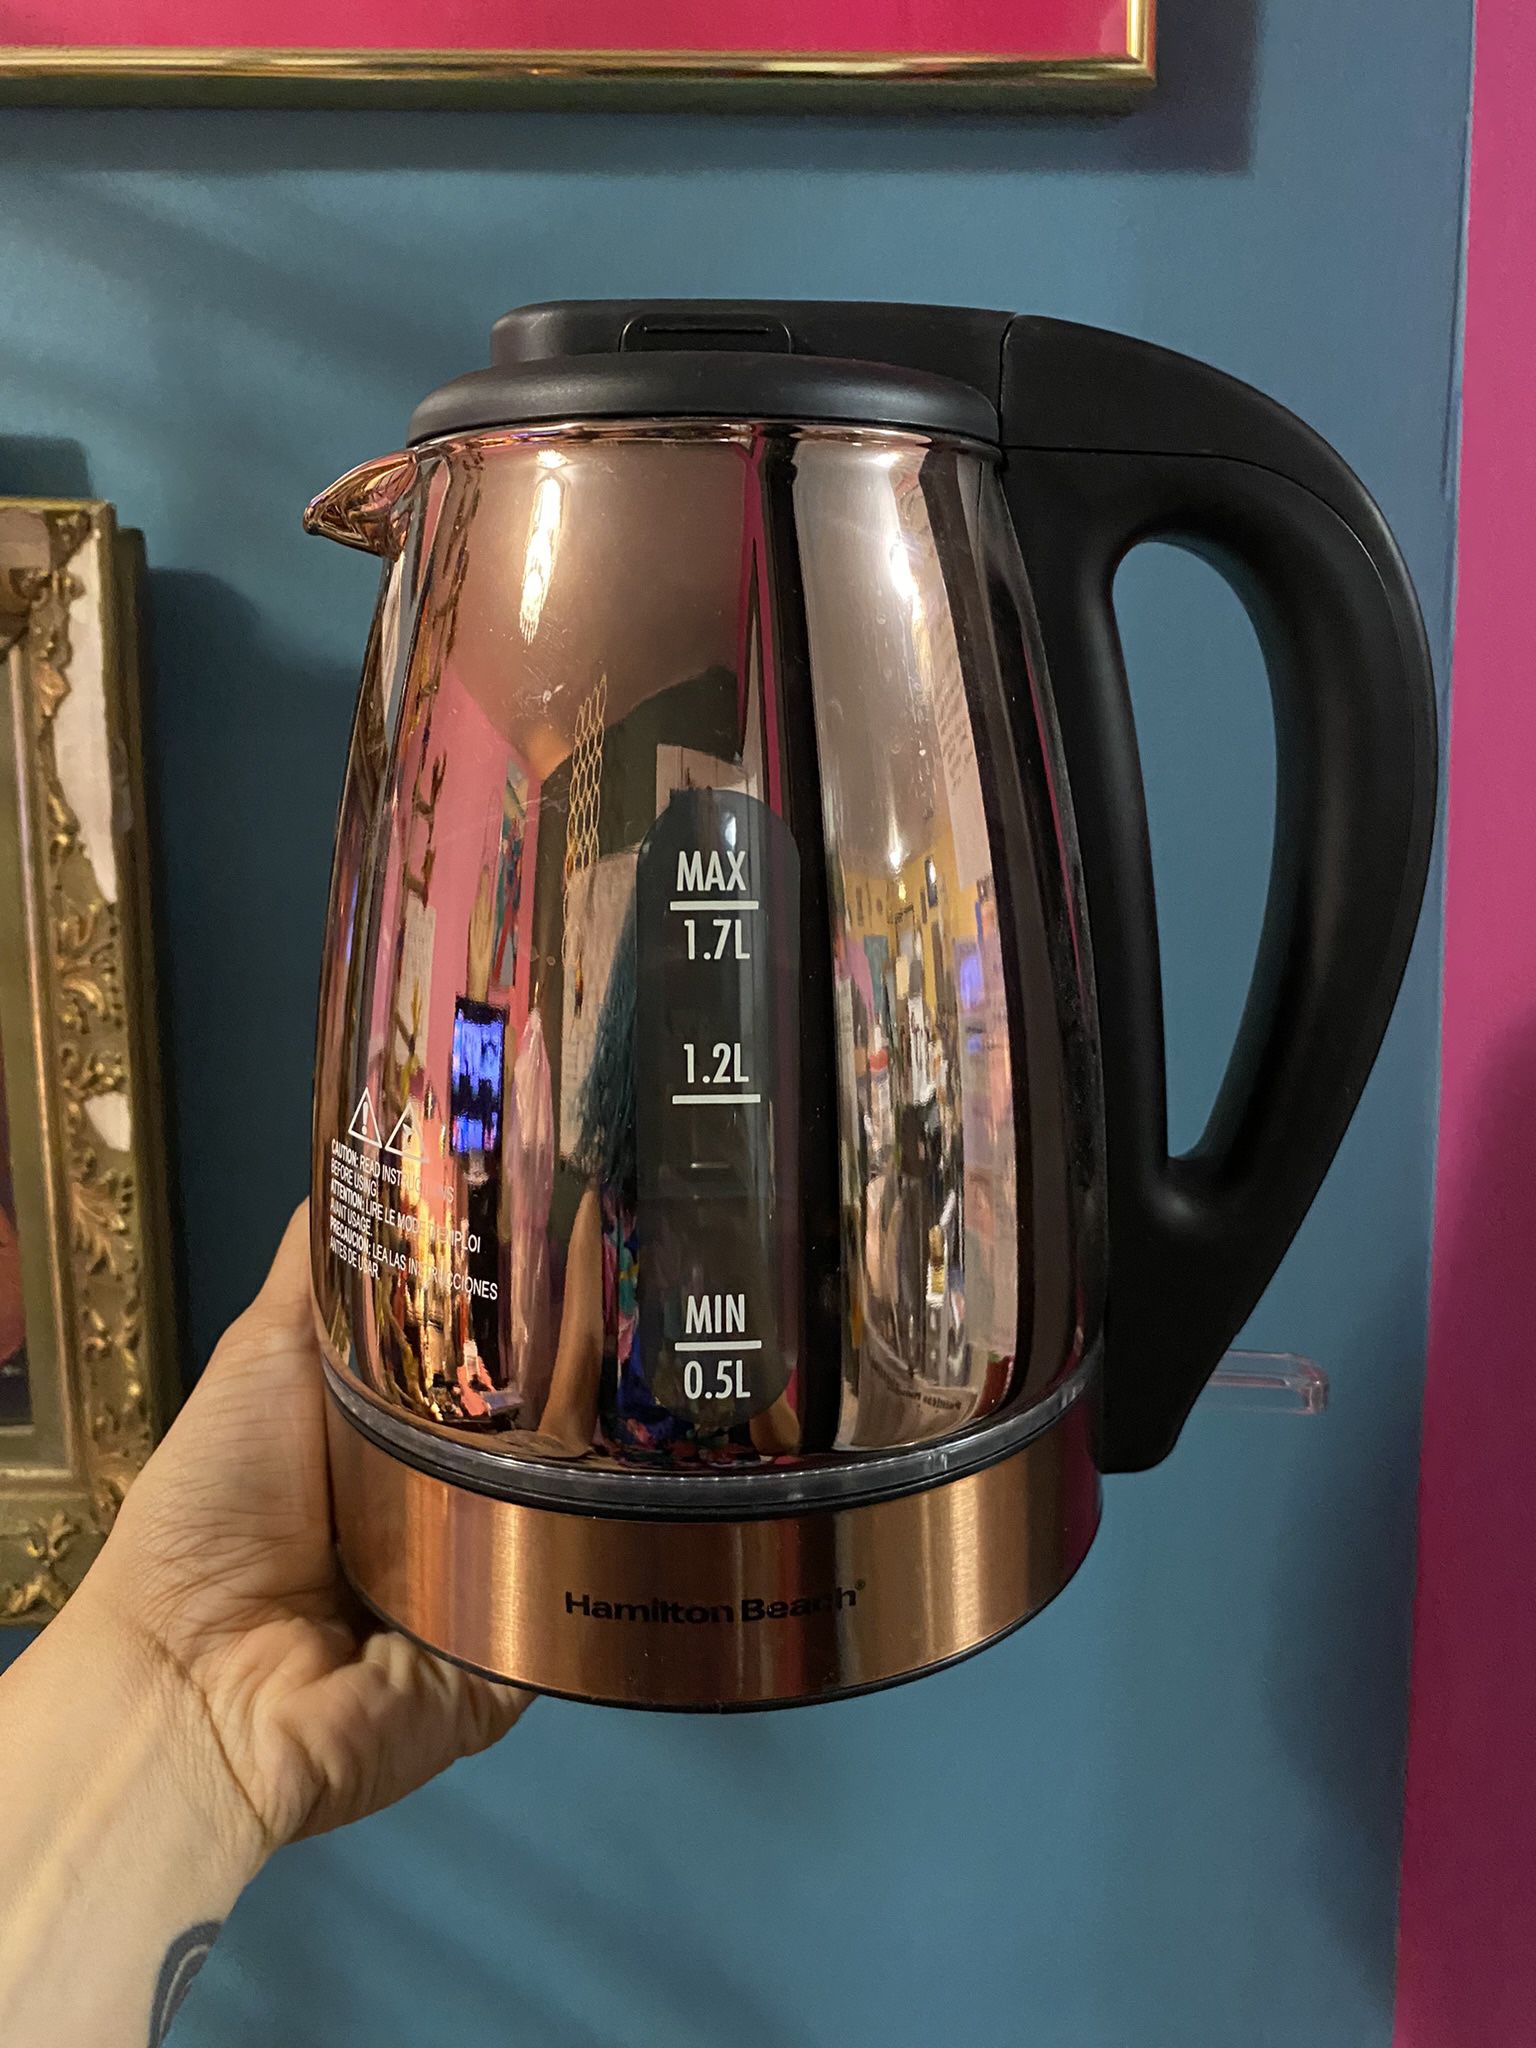 Aicok Electronic Glass Kettle for Sale in Superior, MT - OfferUp